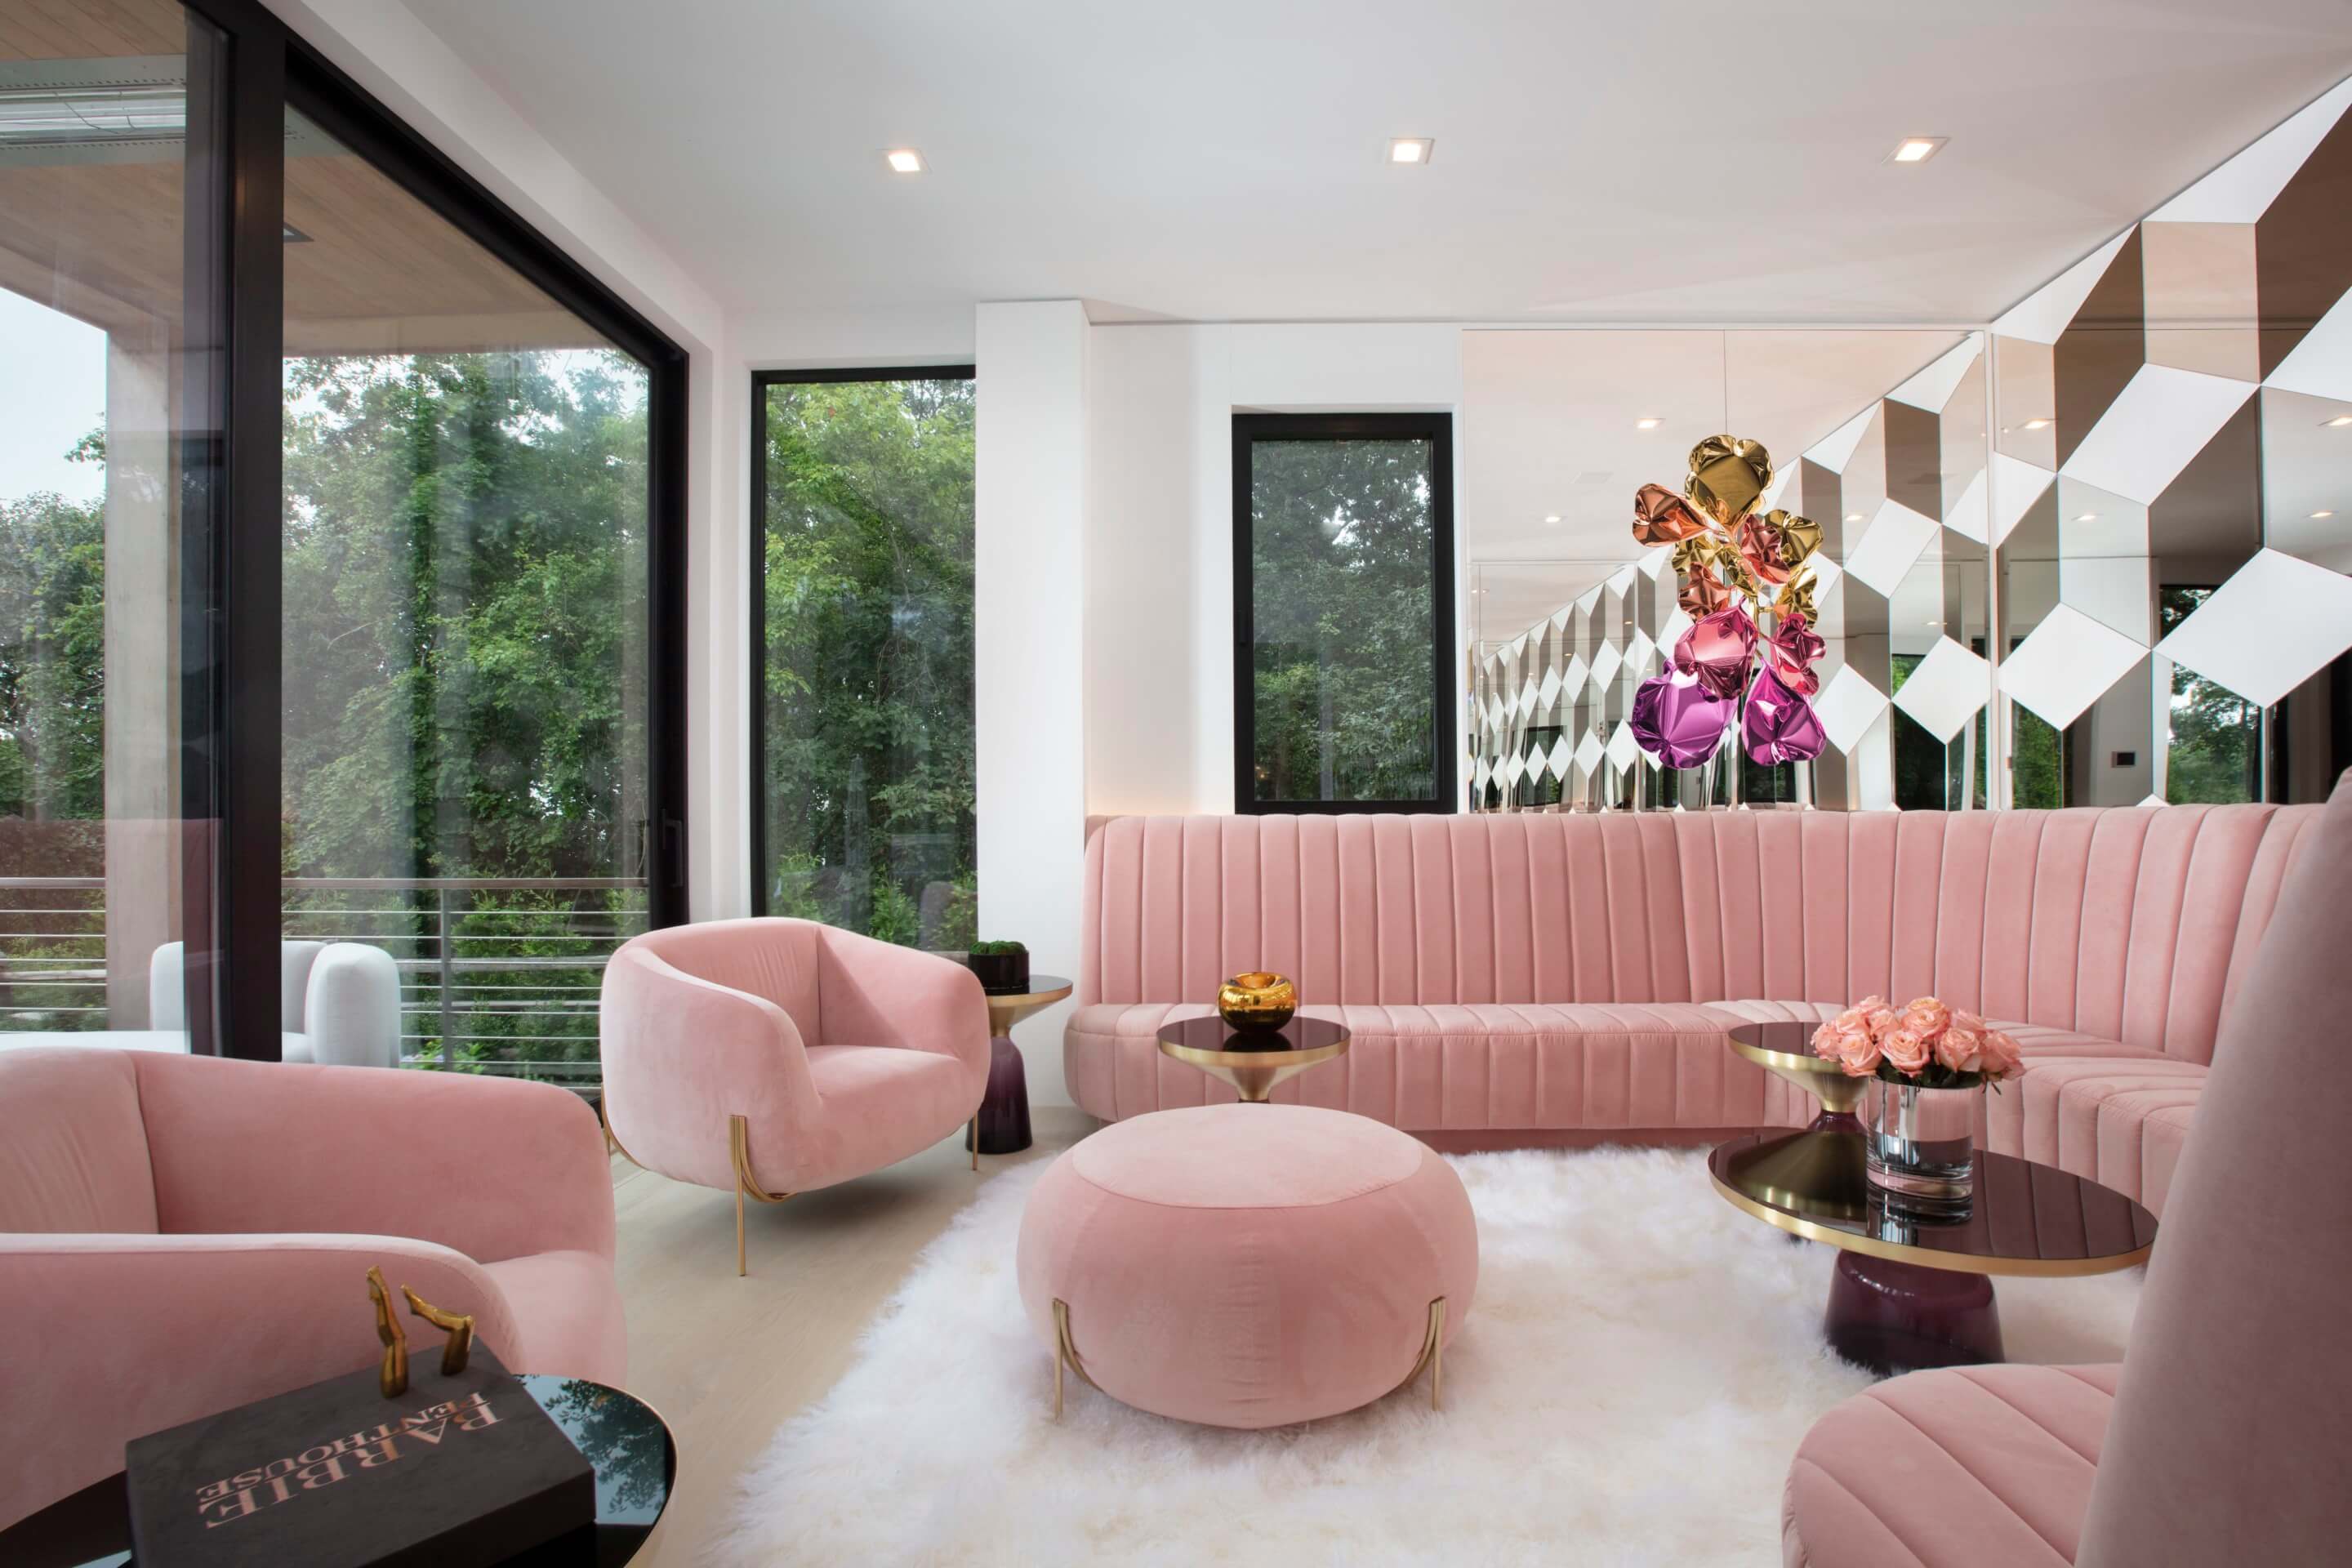 photograph depicting a domestic living room filled with plush pink furniture